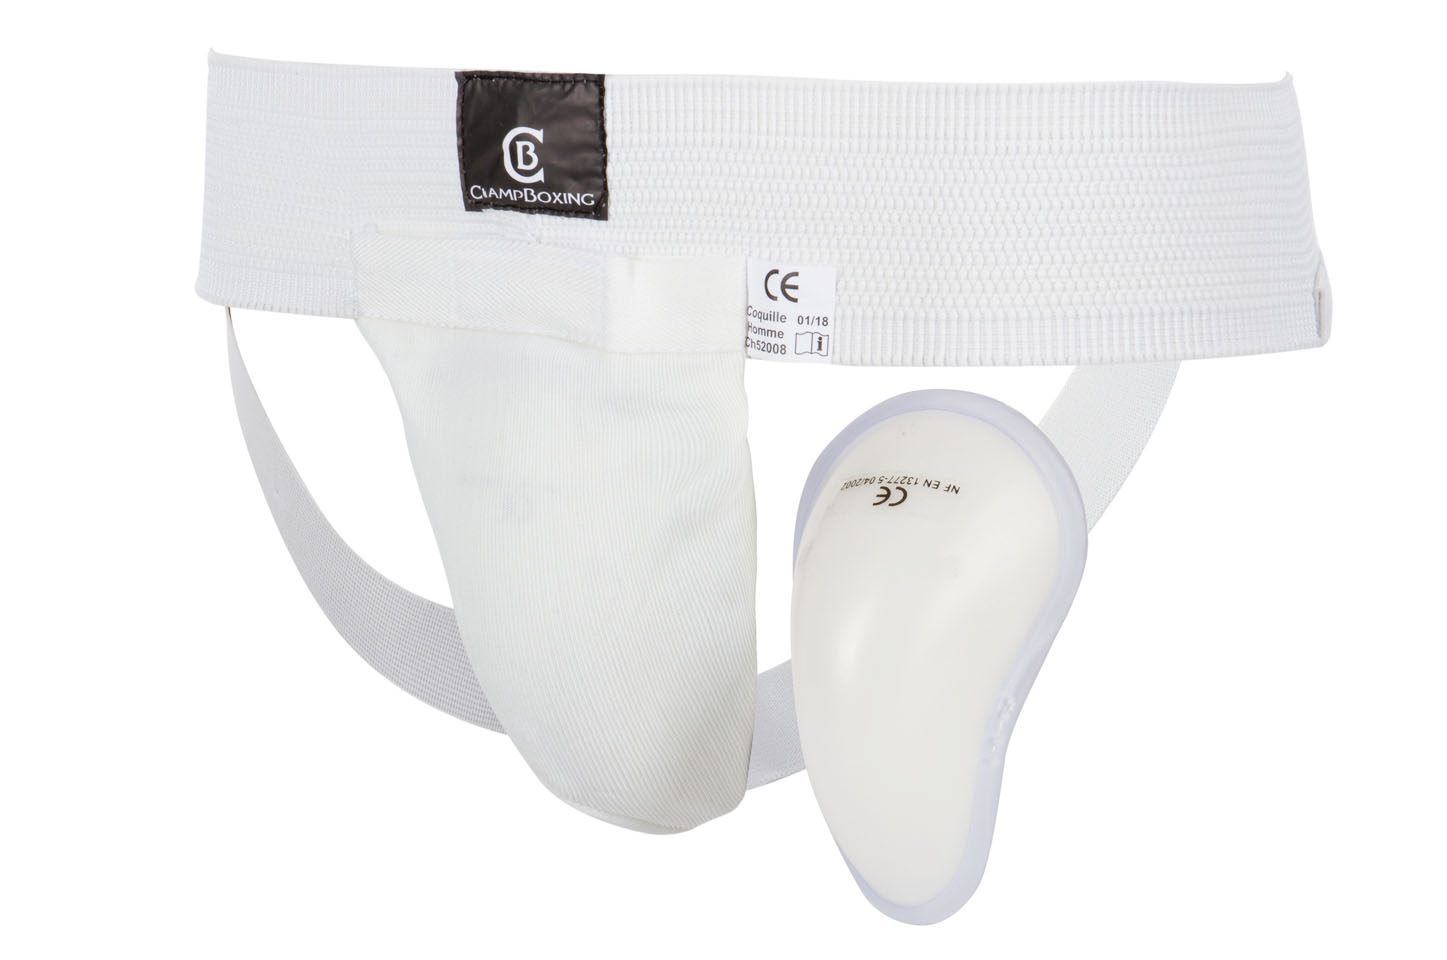 Coquille & Slip de support, Homme - CH52008, Champboxing 